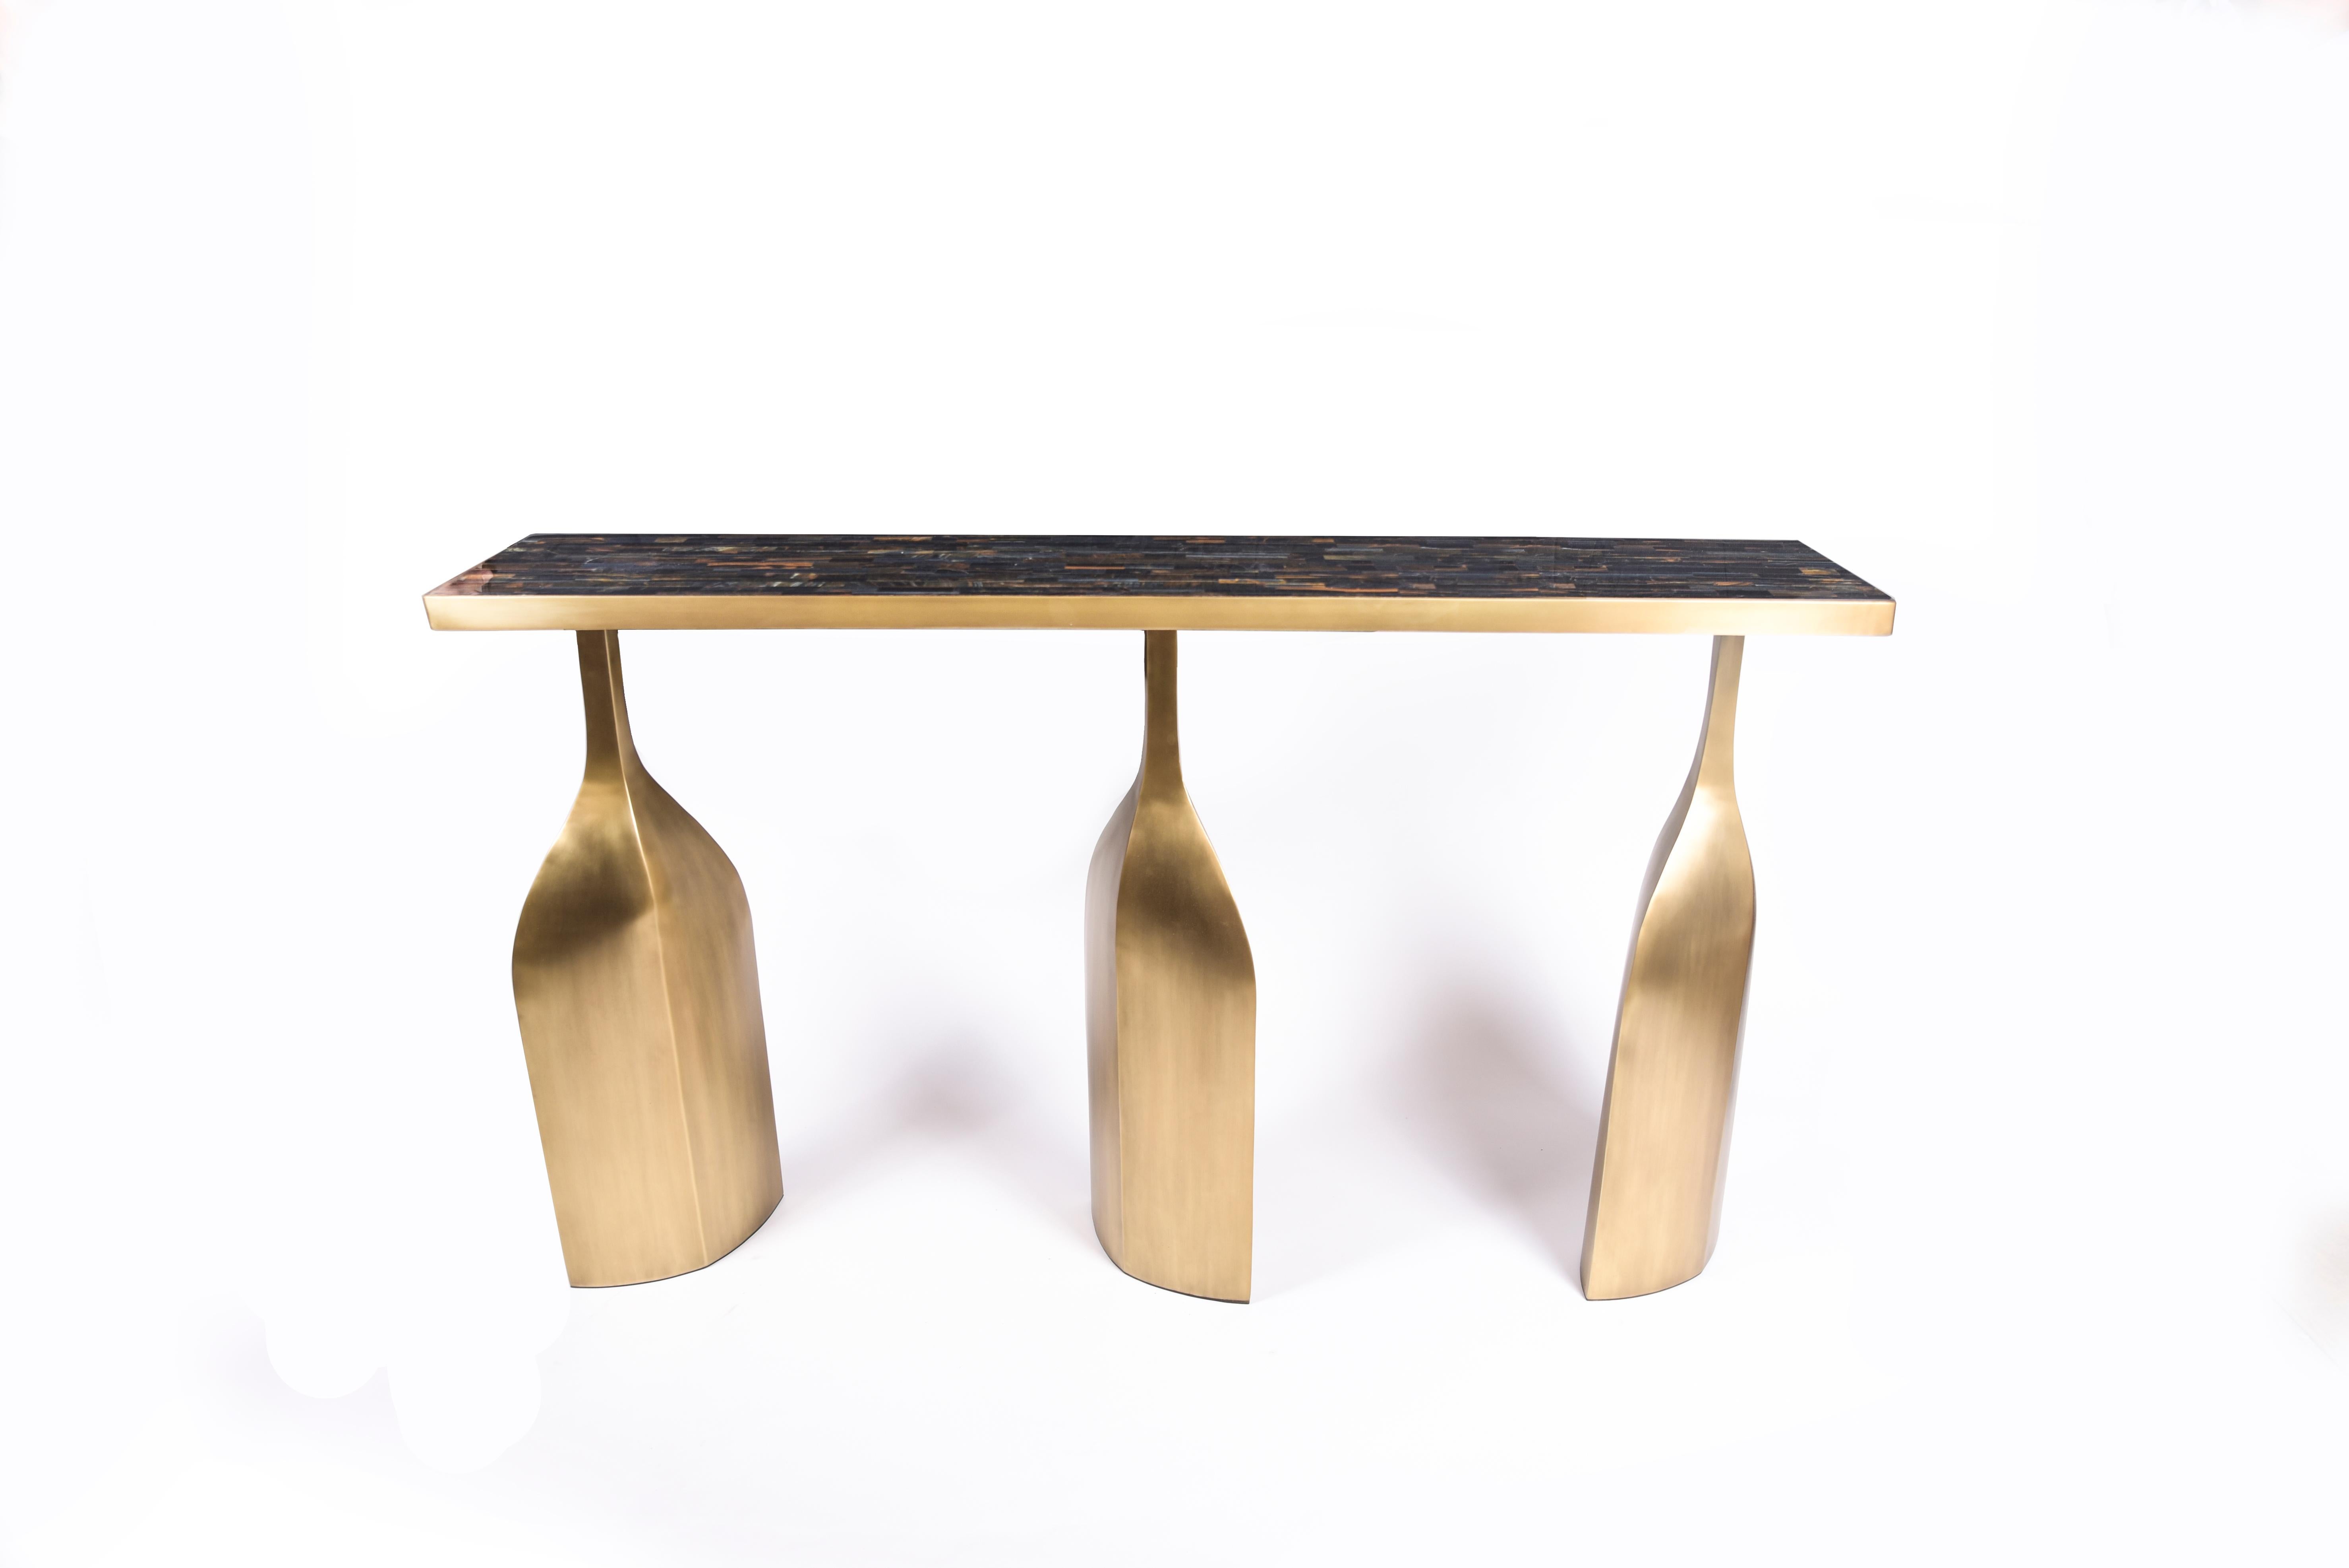 The trinity console is bold and exquisite in design. The top is inlaid in coal black shagreen and sits on three stunning bronze-patina sculptural legs. The top is available in other finishes, see images at end of slide. This piece is designed by